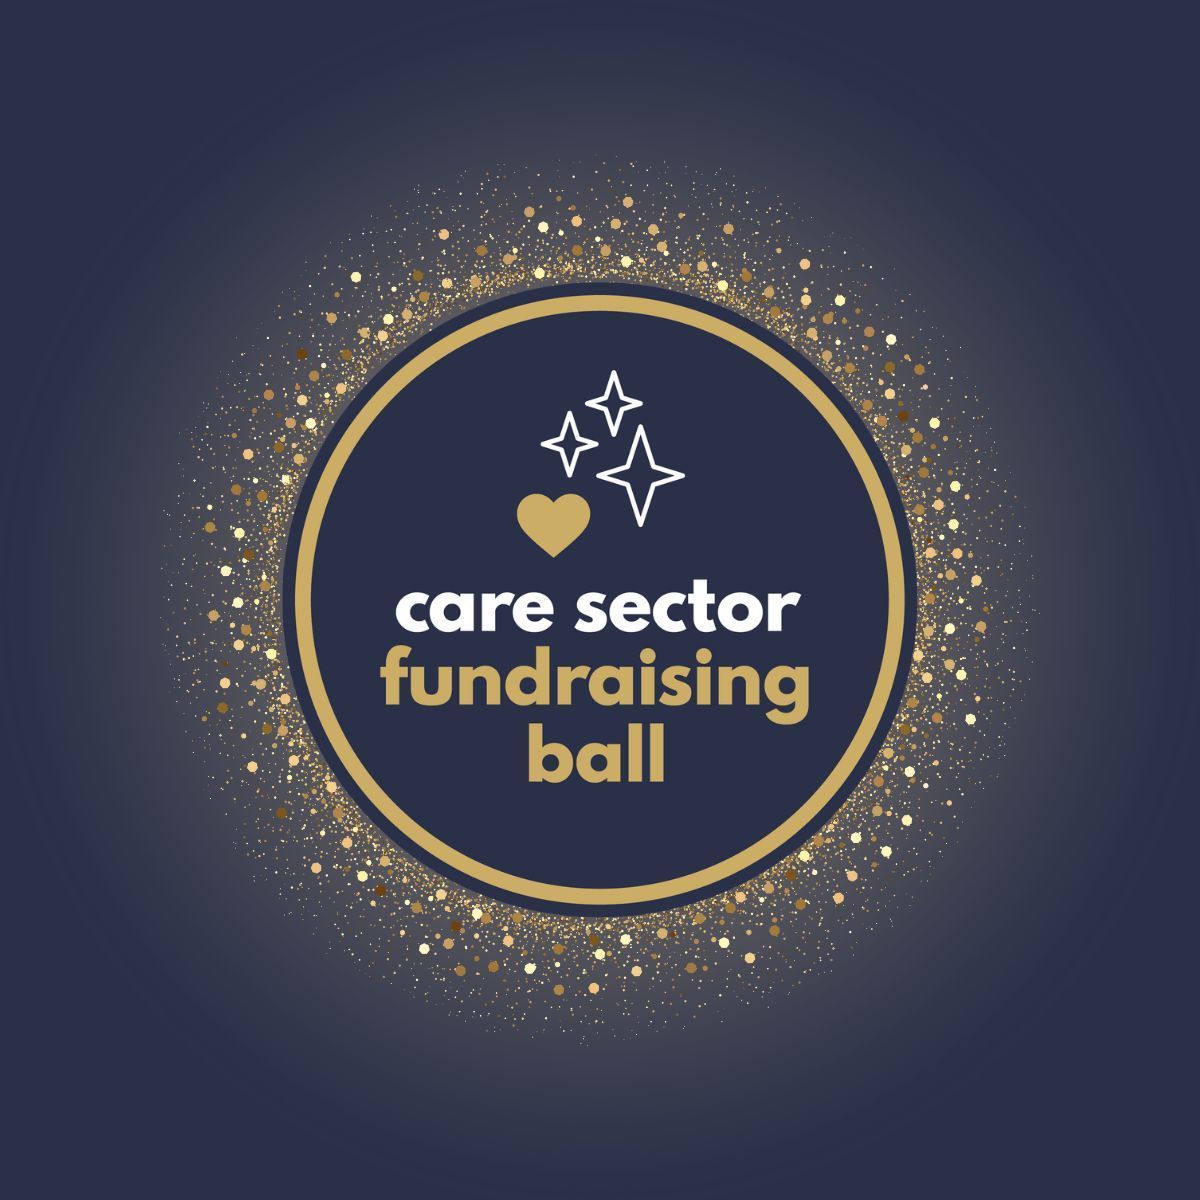 🎉We're delighted to announce that the Care Sector Fundraising Ball has chosen The Care Workers' Charity as one of this year's beneficiaries.😍 Please contact victoria.nc@thecwc.org.uk if you would like to purchase a ticket or table at this years ball #SupportUs #Fundraise